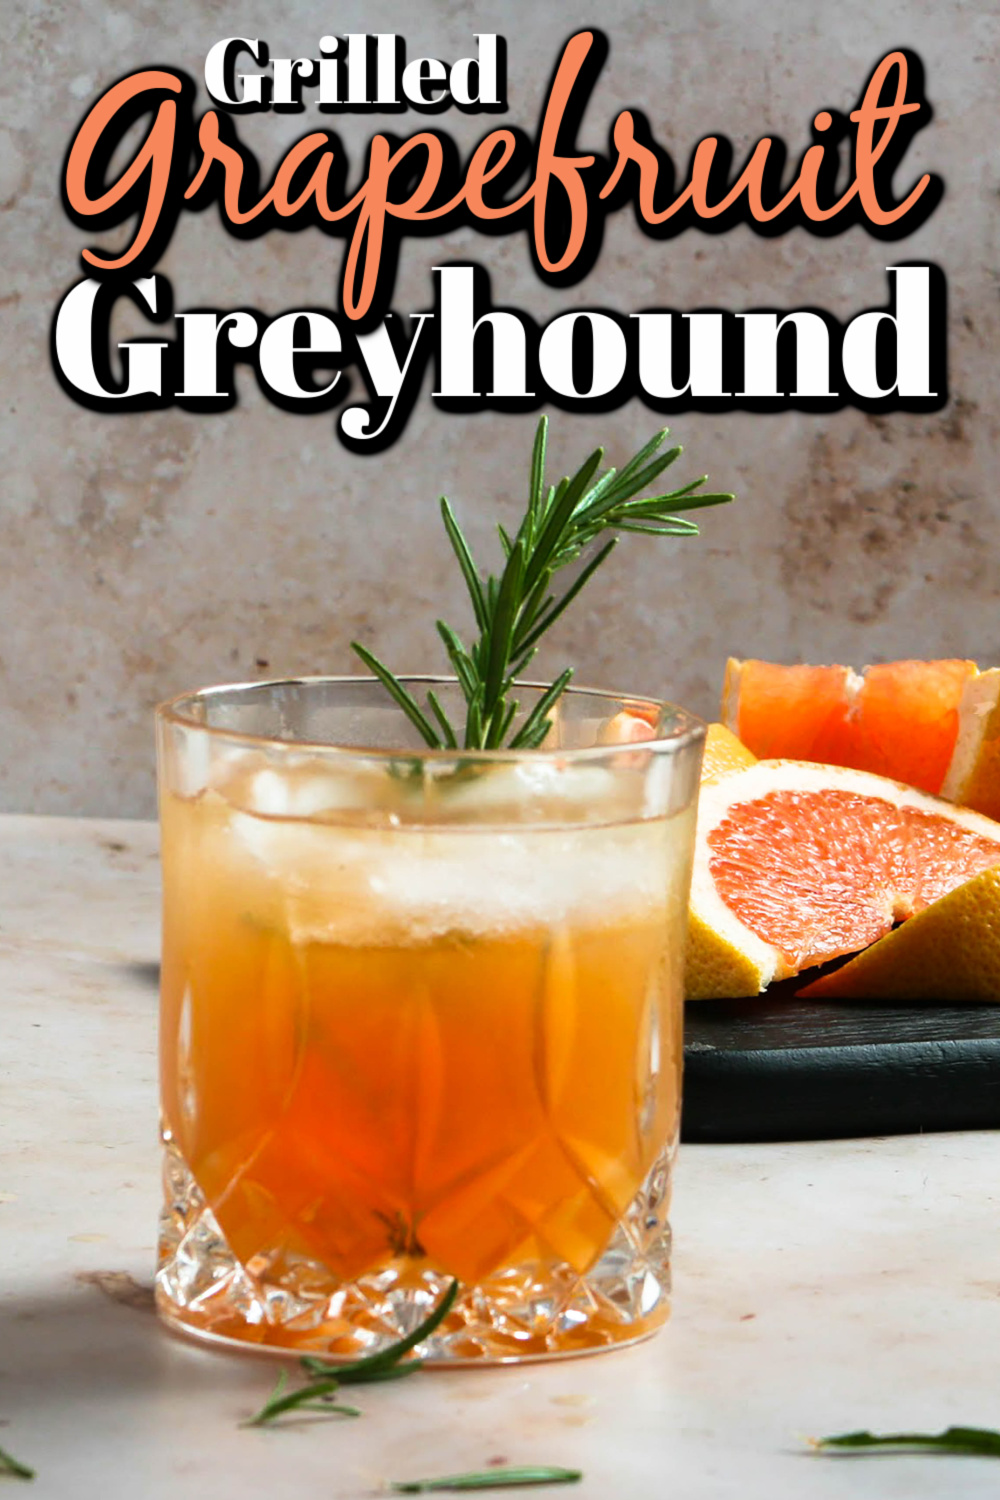 Super refreshing, tart, and just a little sweet. This Grilled Grapefruit Greyhound Cocktail is easy to make with simple ingredients.